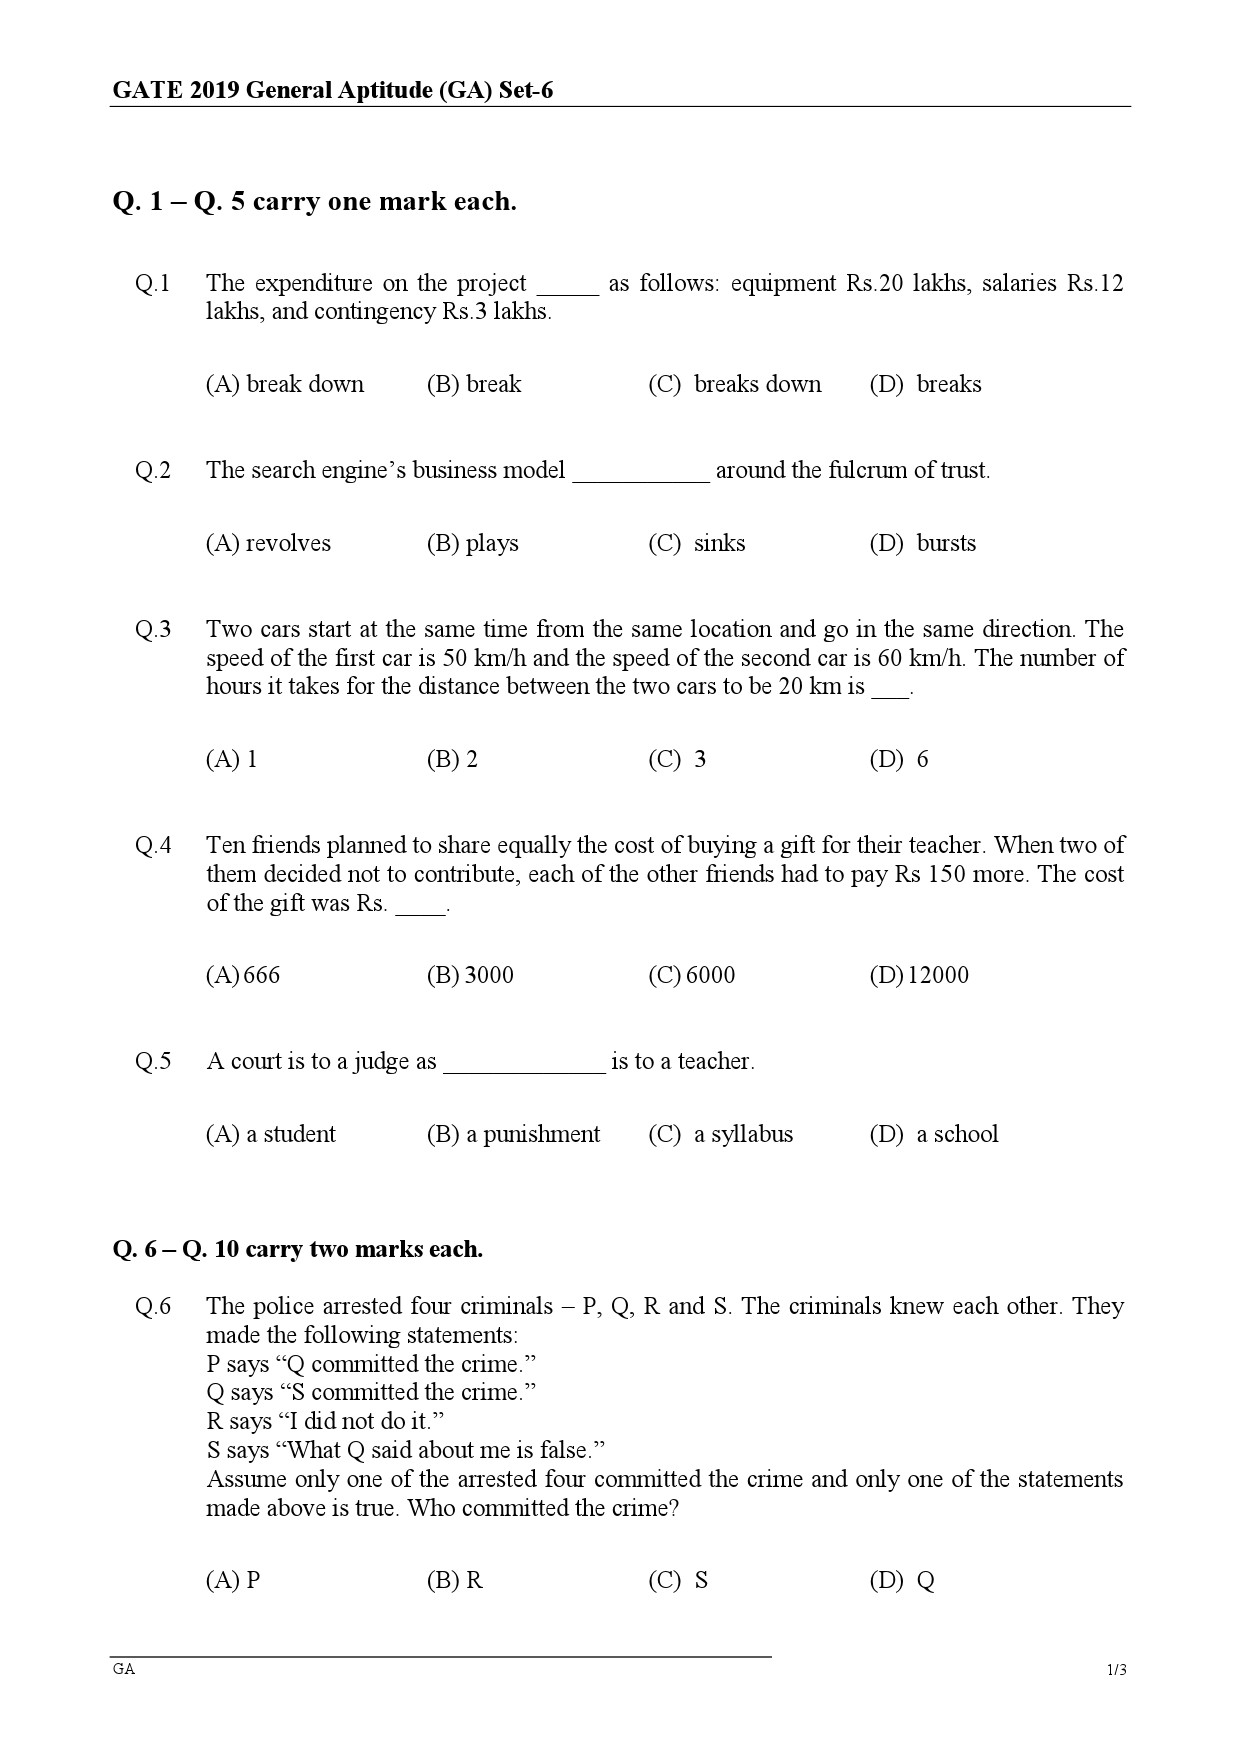 GATE Exam Question Paper 2019 Chemical Engineering 1